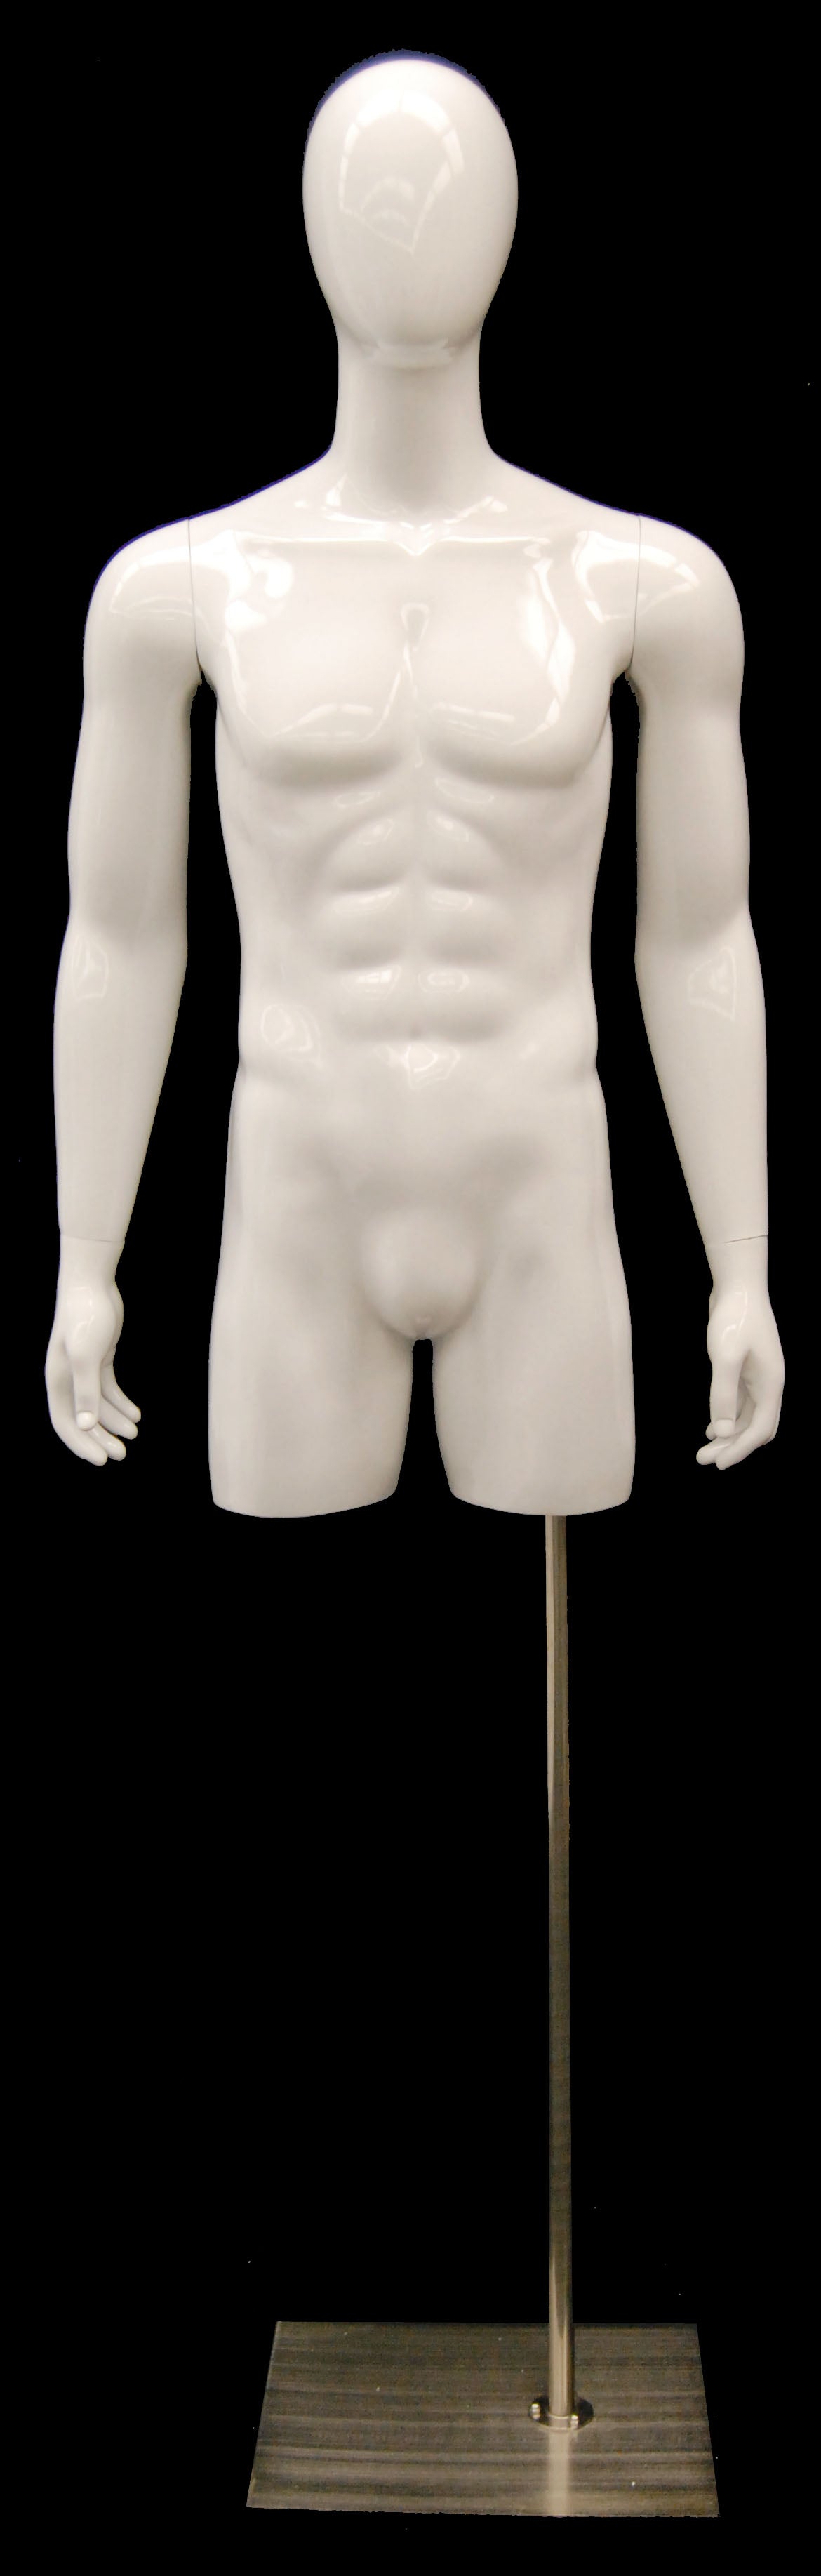 Egghead 3/4 Male Mannequin Torso with Head and Arms: Glossy White